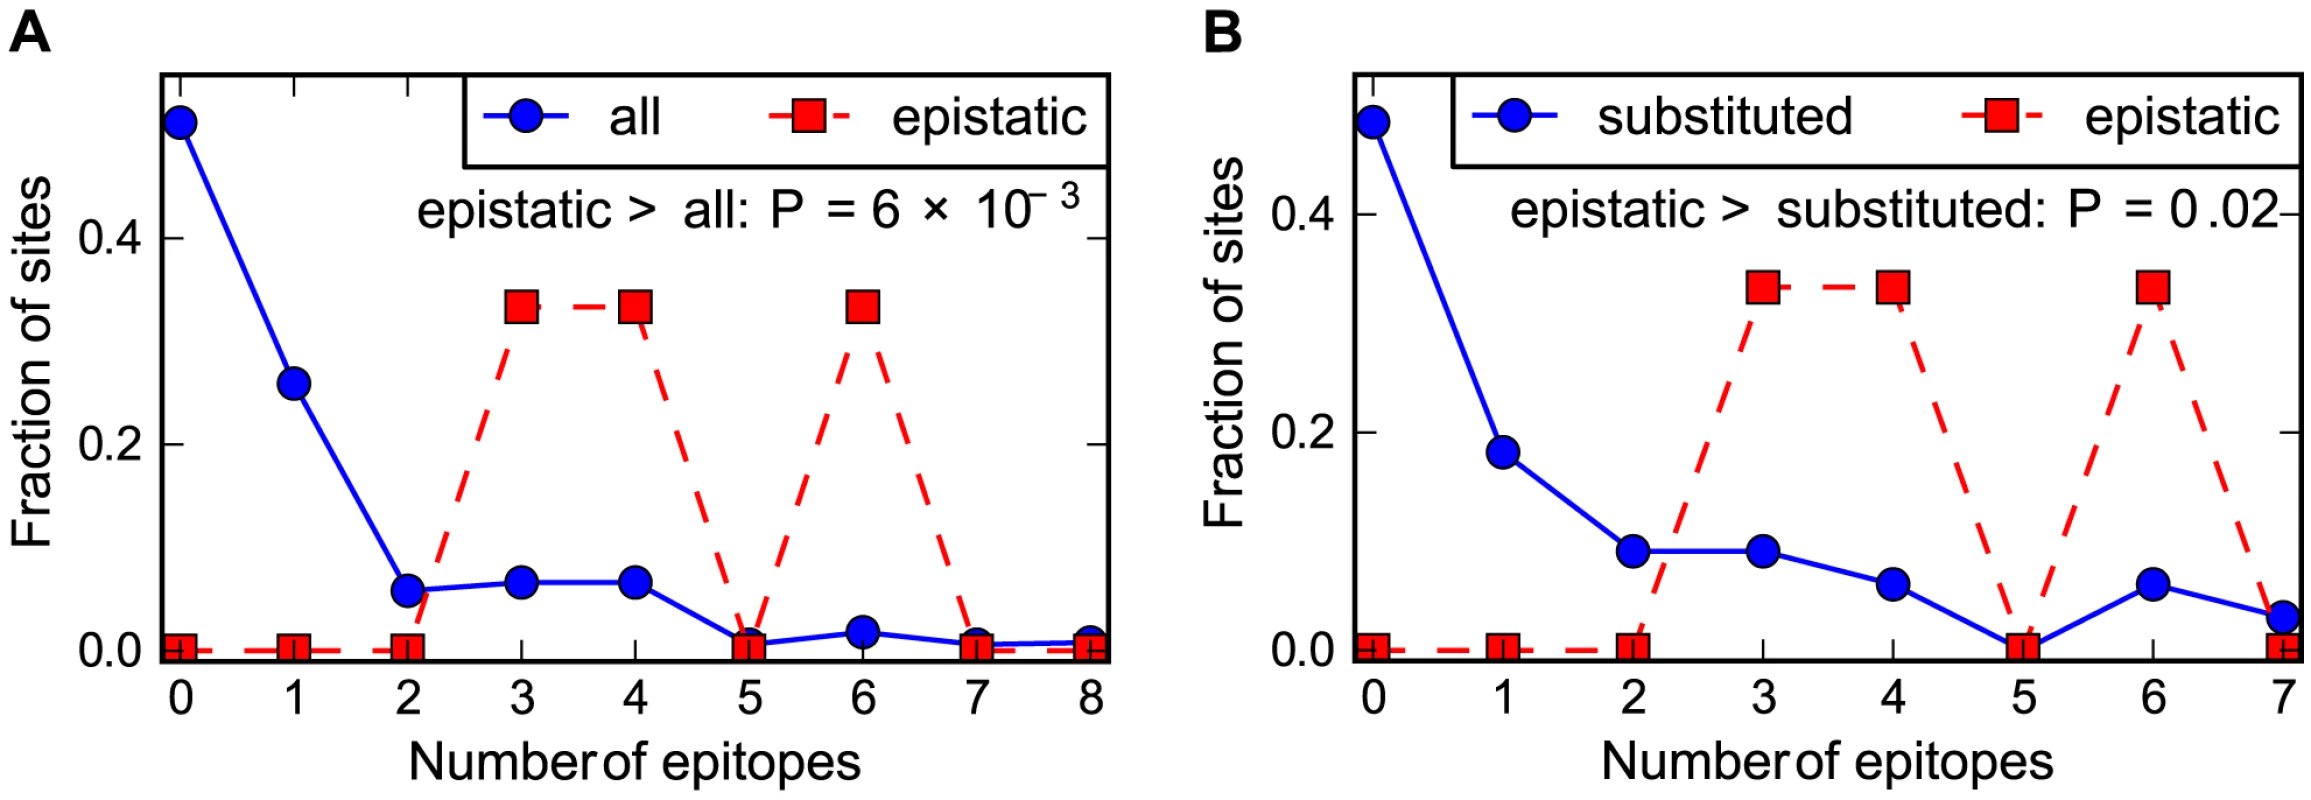 Epistasis in human NP occurs at sites enriched in CTL epitopes.